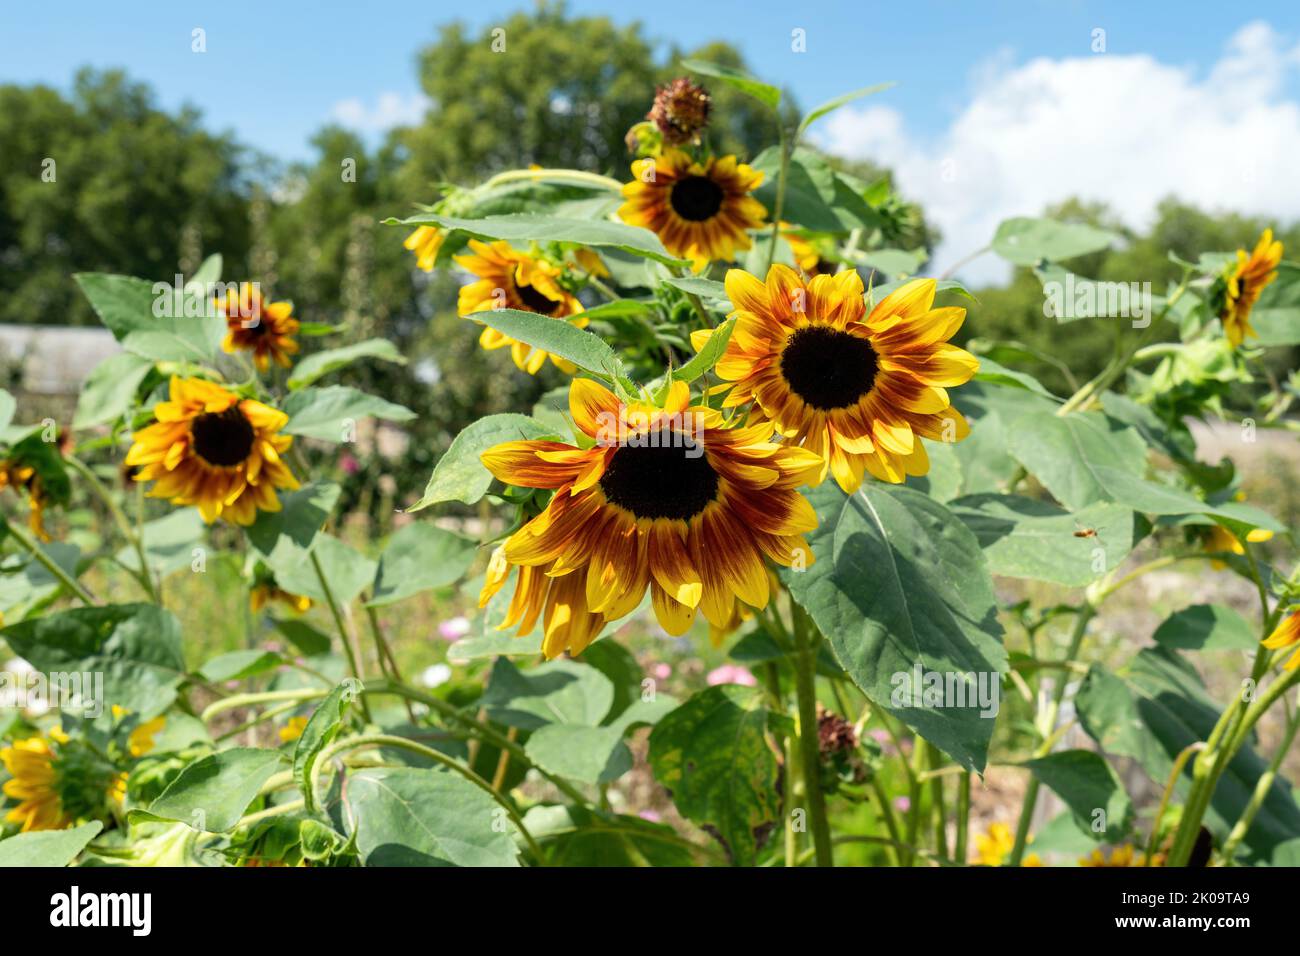 Sunflowers on a sunny summer day Stock Photo